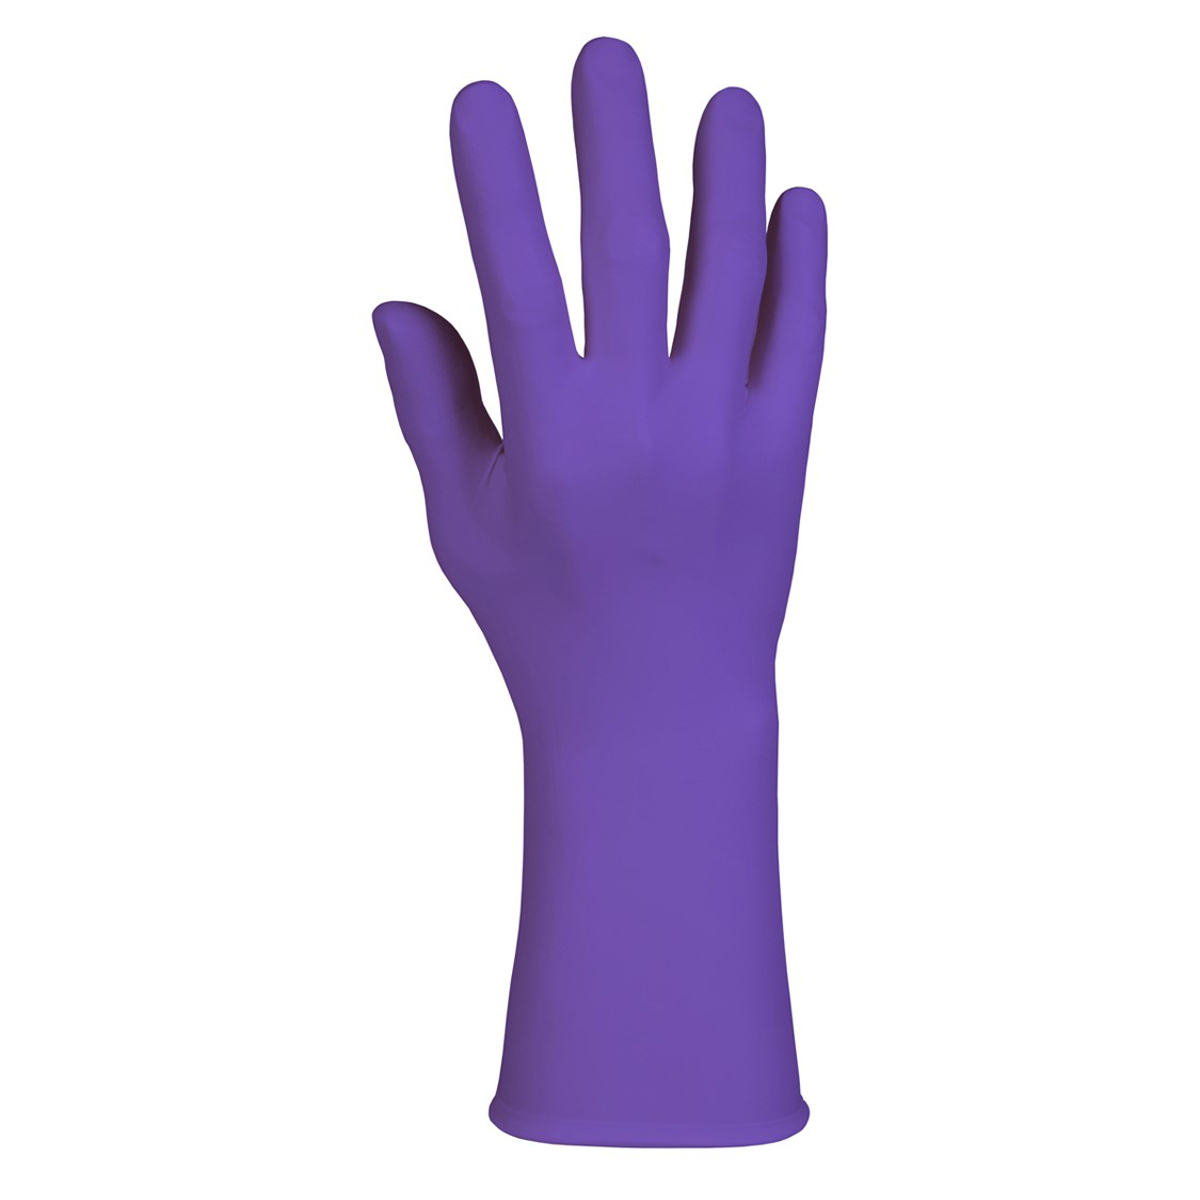 Kimberly-Clark Professional* Large Purple Nitrile-Xtra* 6 mil Nitrile Disposable Exam Gloves (50 Gloves Per Box) (Availability r